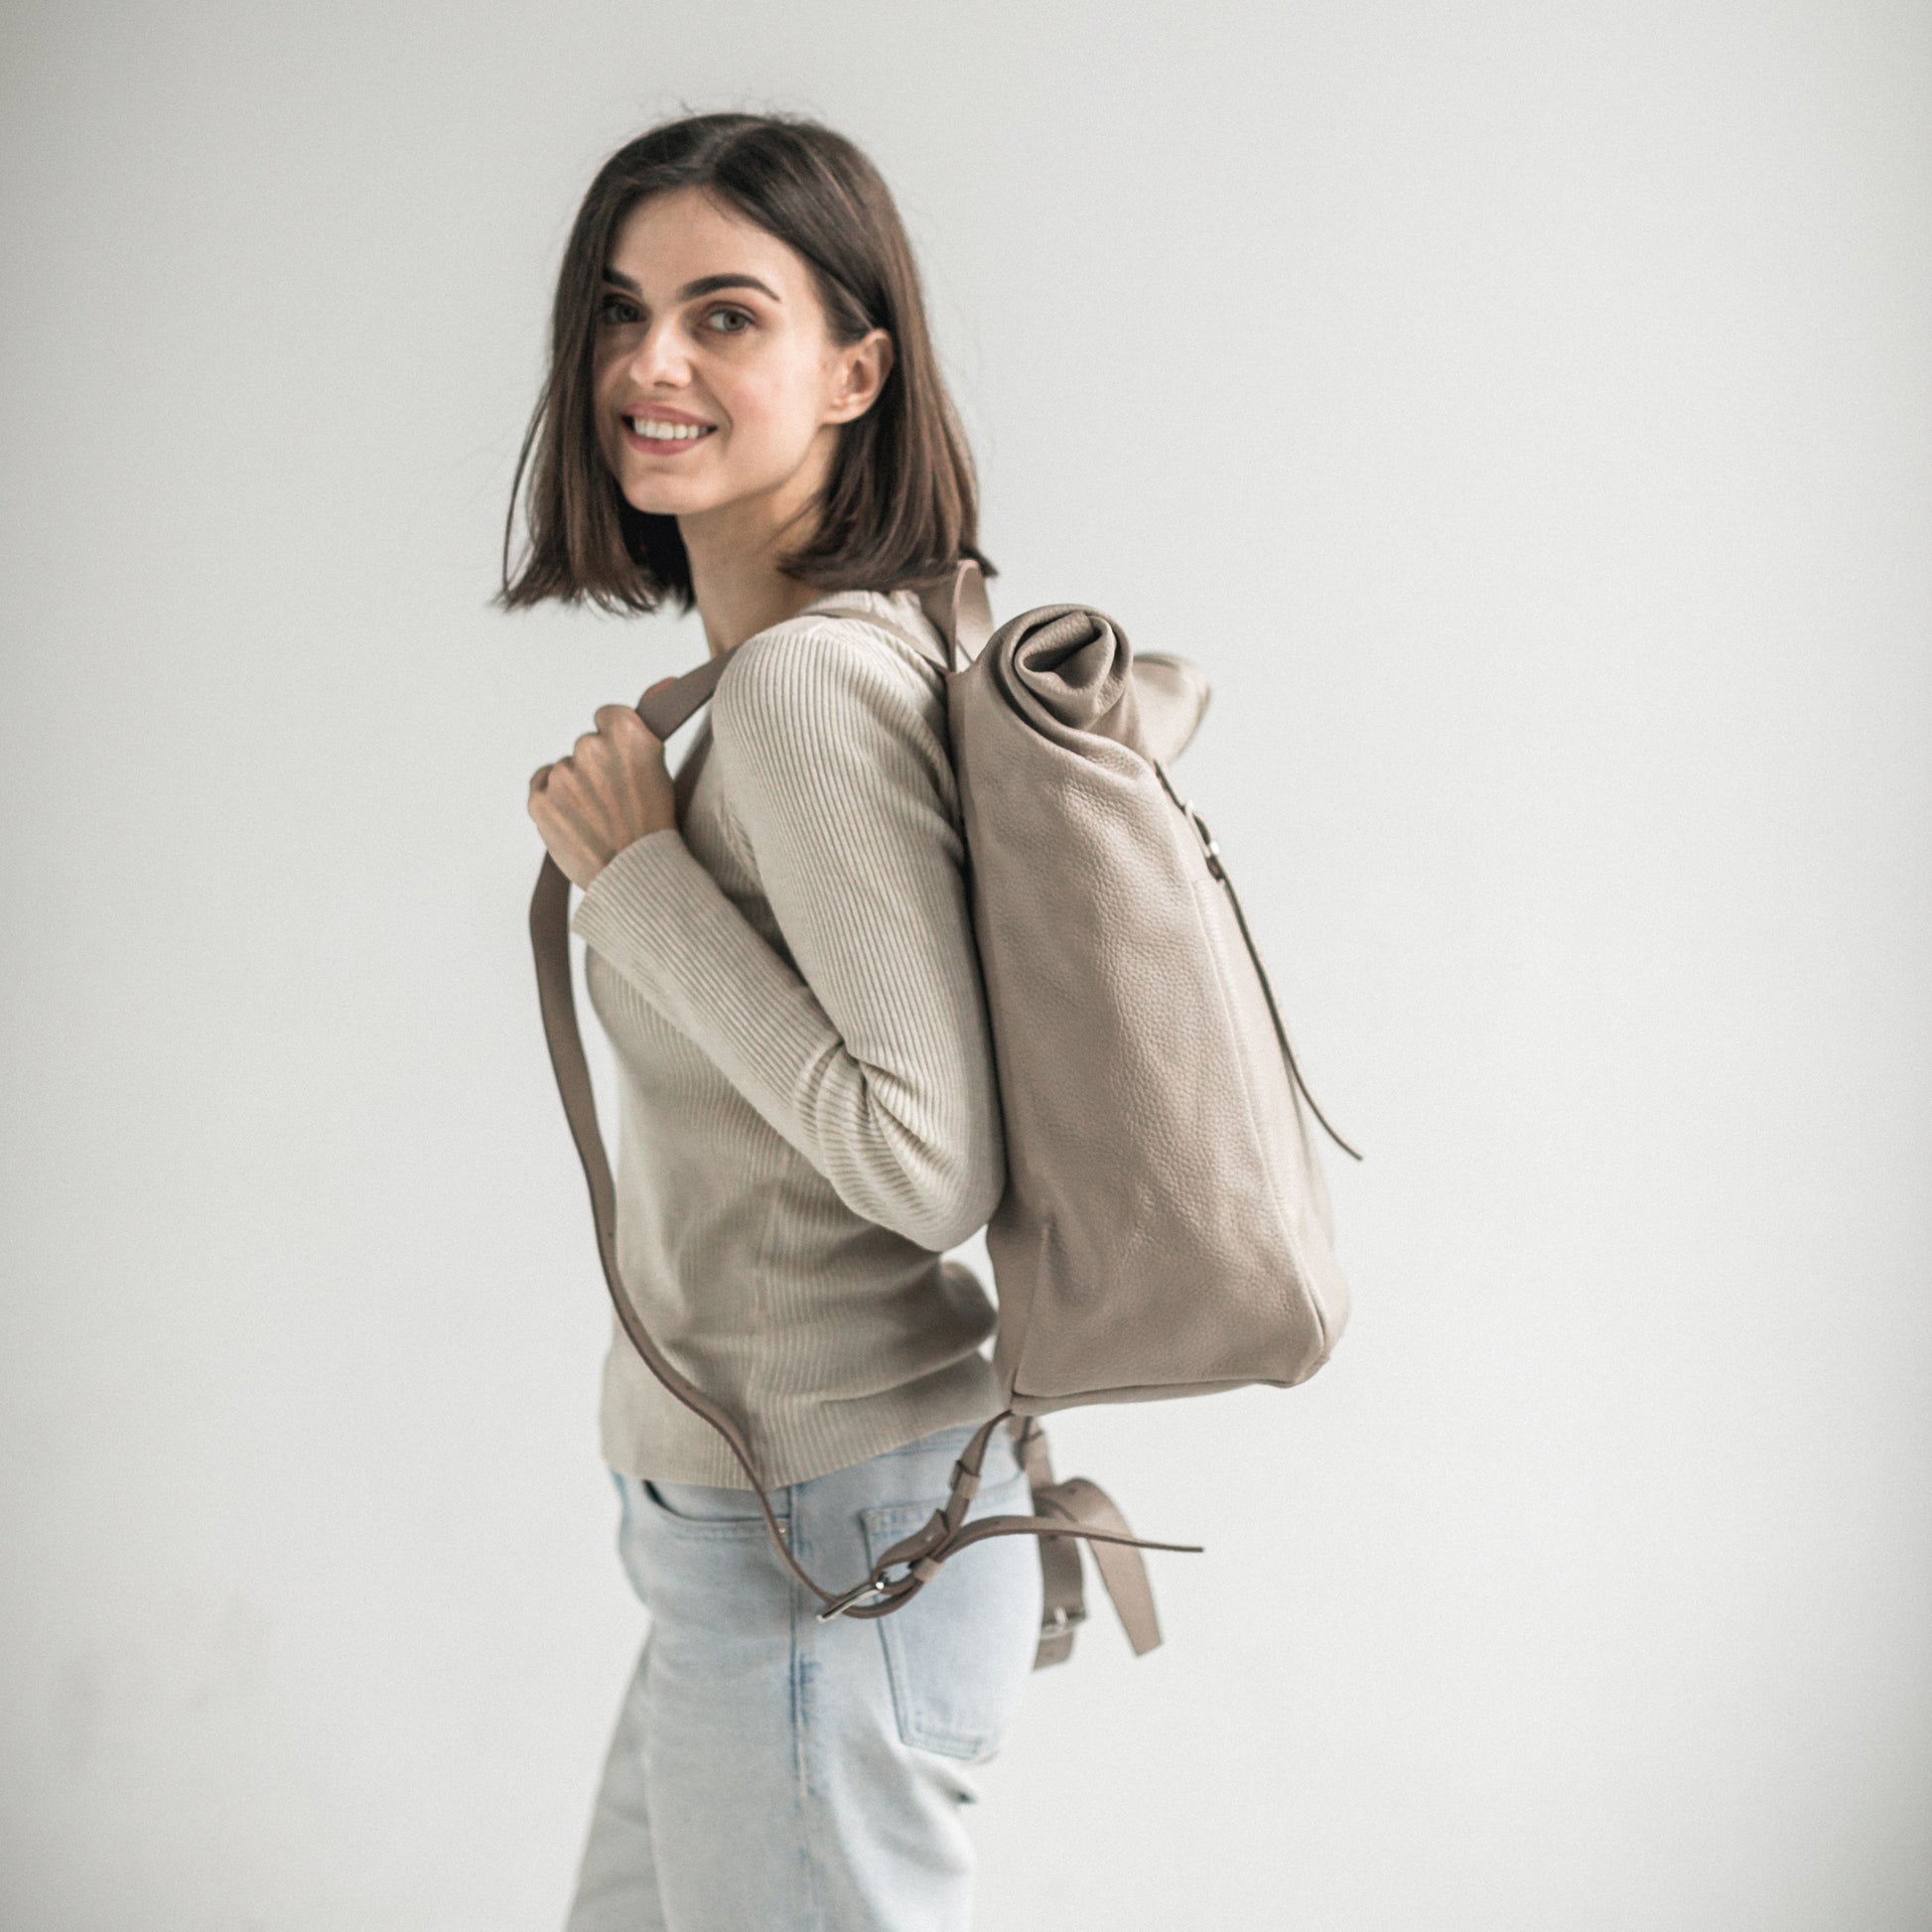 Leather rolltop backpack